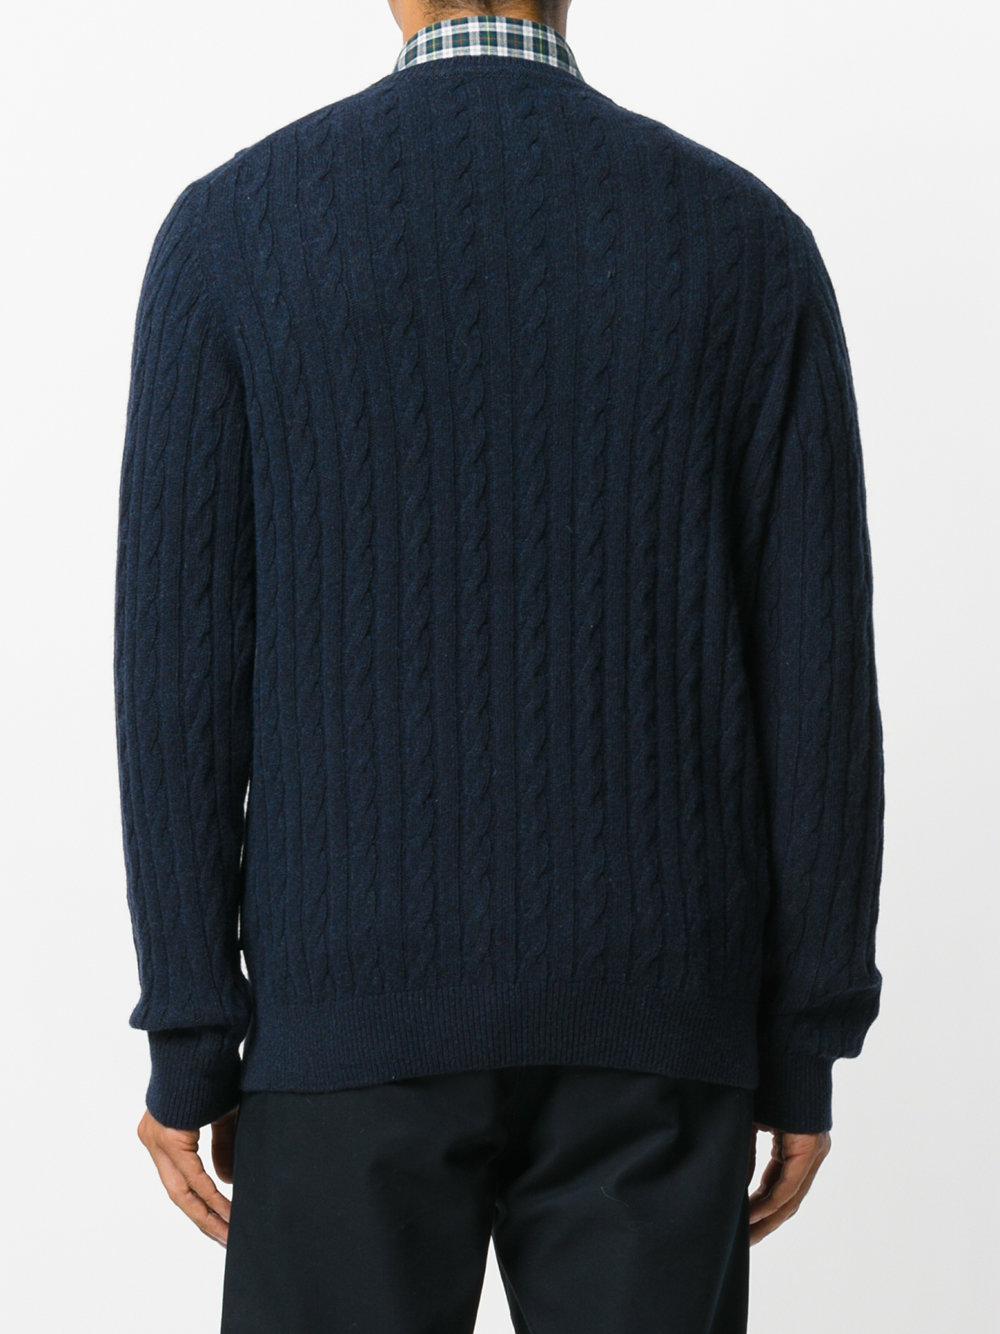 Lyst - Barbour Cable Knit Jumpber in Blue for Men